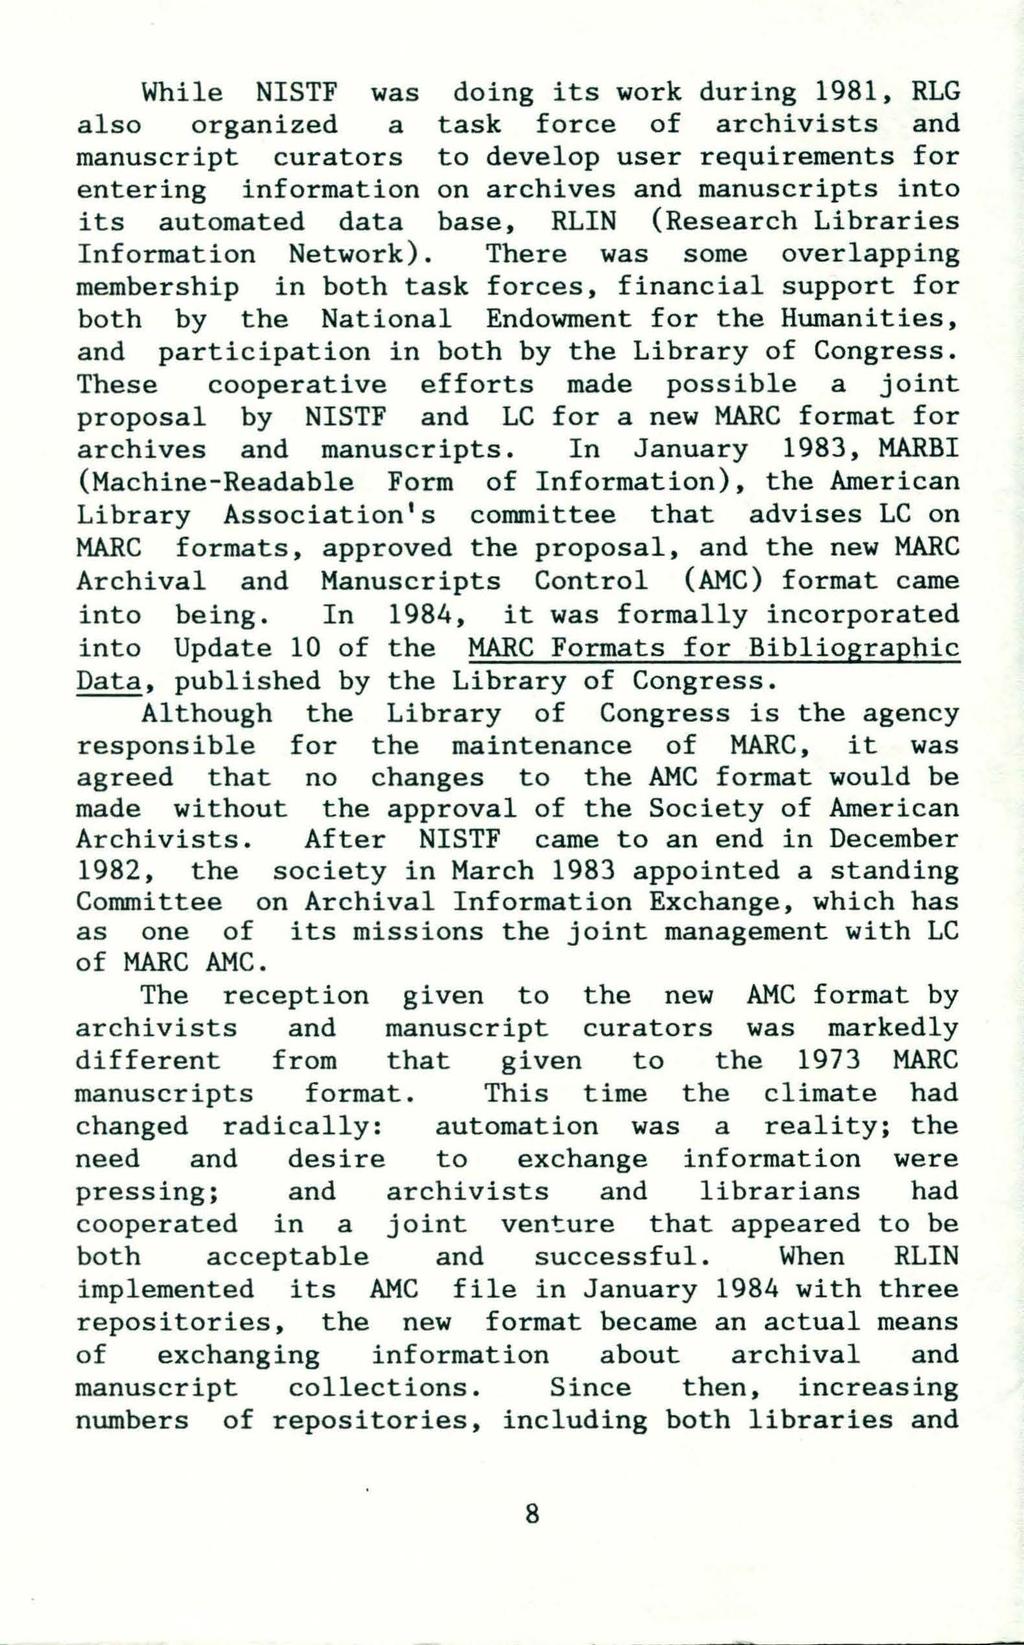 While NISTF was doing its work during 1981, RLG also organized a task force of archivists and manuscript curators to develop user requirements for entering information on archives and manuscripts